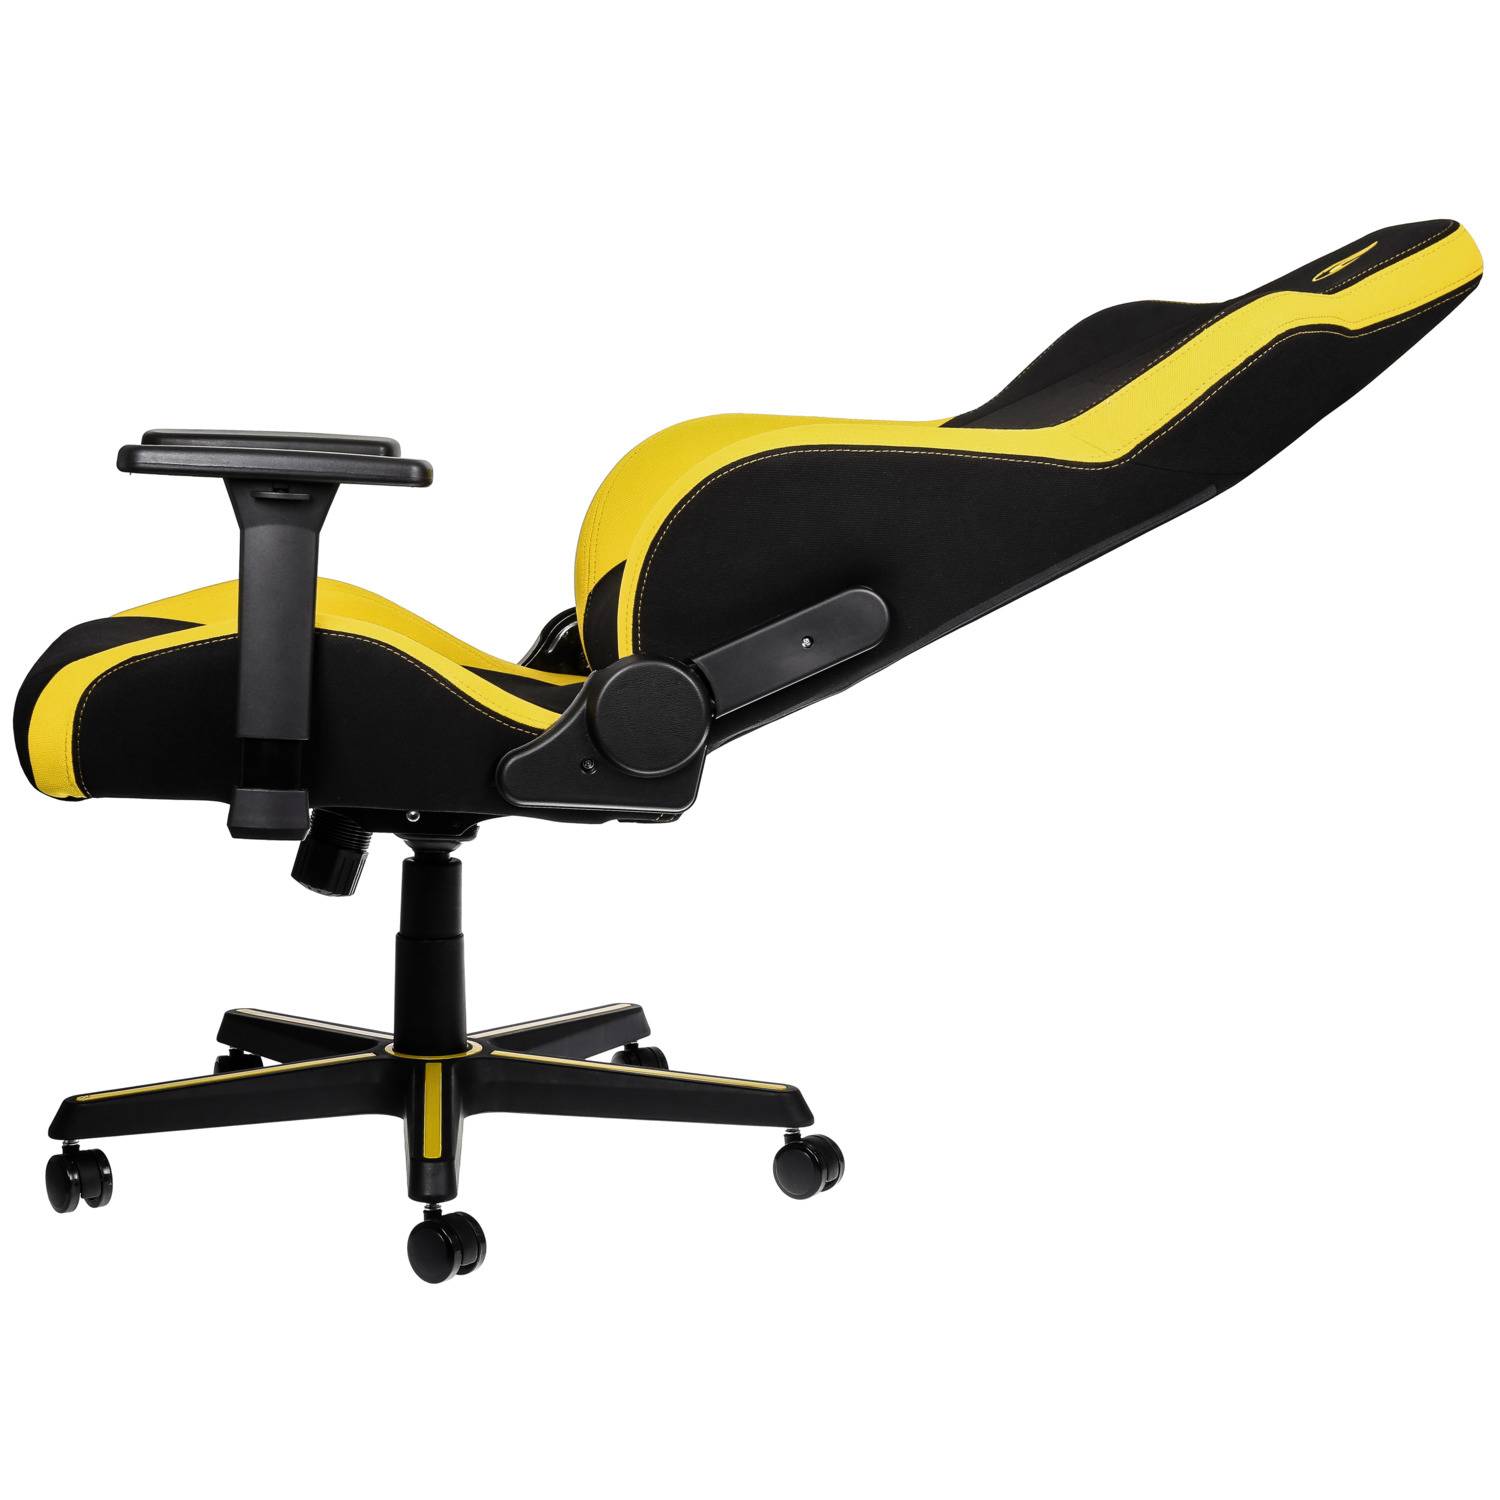  - S300 Gaming Chair Astral Yellow